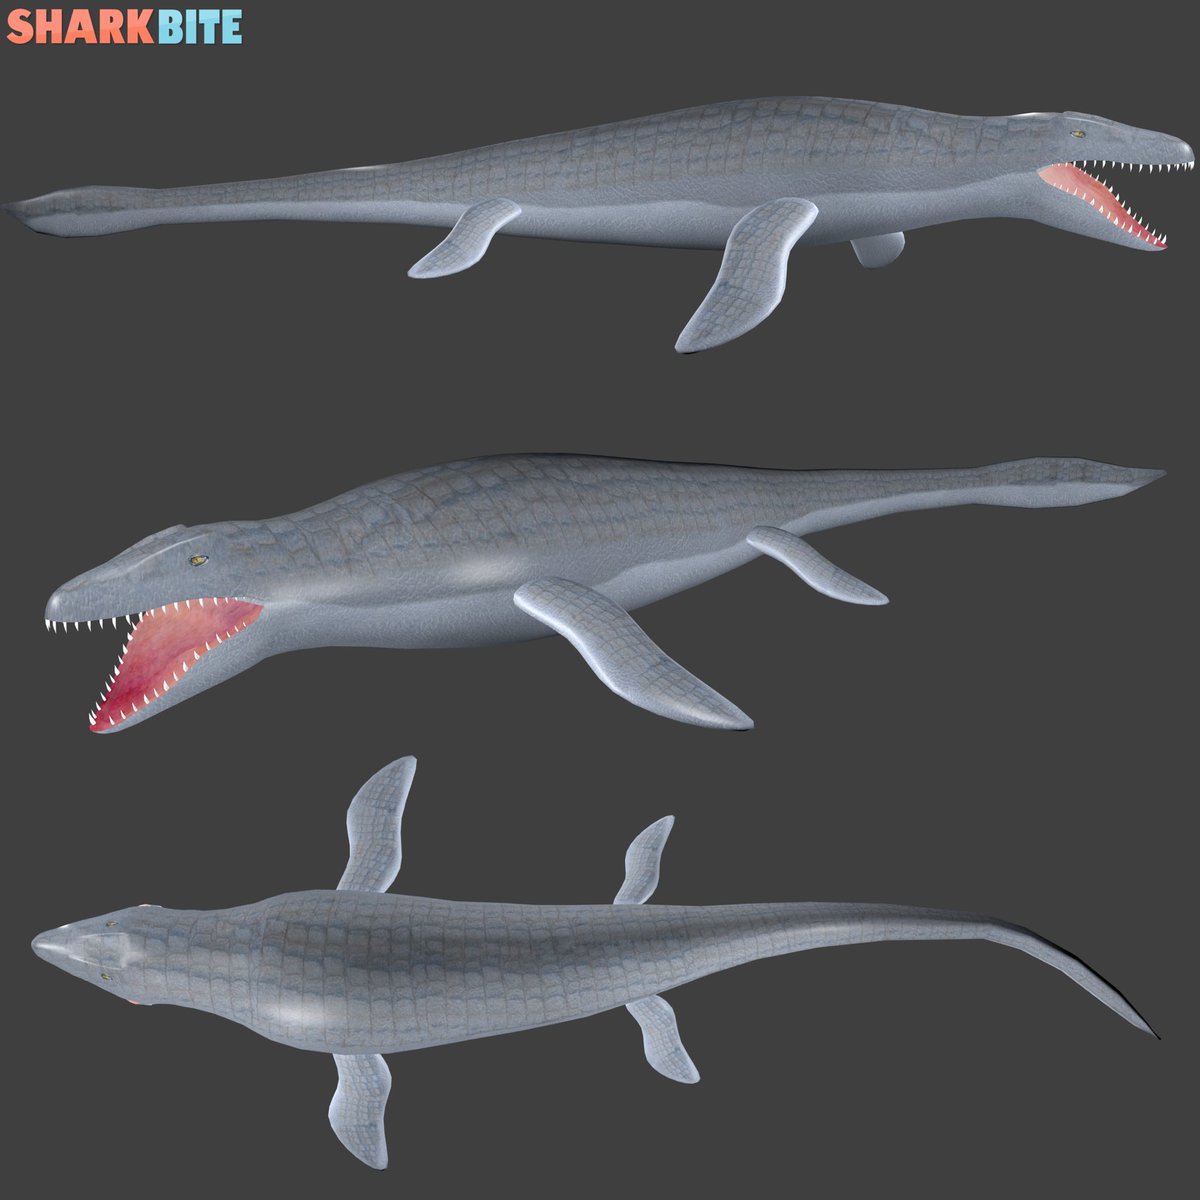 Simon On Twitter The Mosa Is Coming Introducing Sharkbite S Newest Greatest Largest Apex Predator Yet The Mosasaurus You Guys Requested It So We Re Excited To Confirm The Mosasaurus Will Be Diving - roblox sharkbite twitter codes 2019